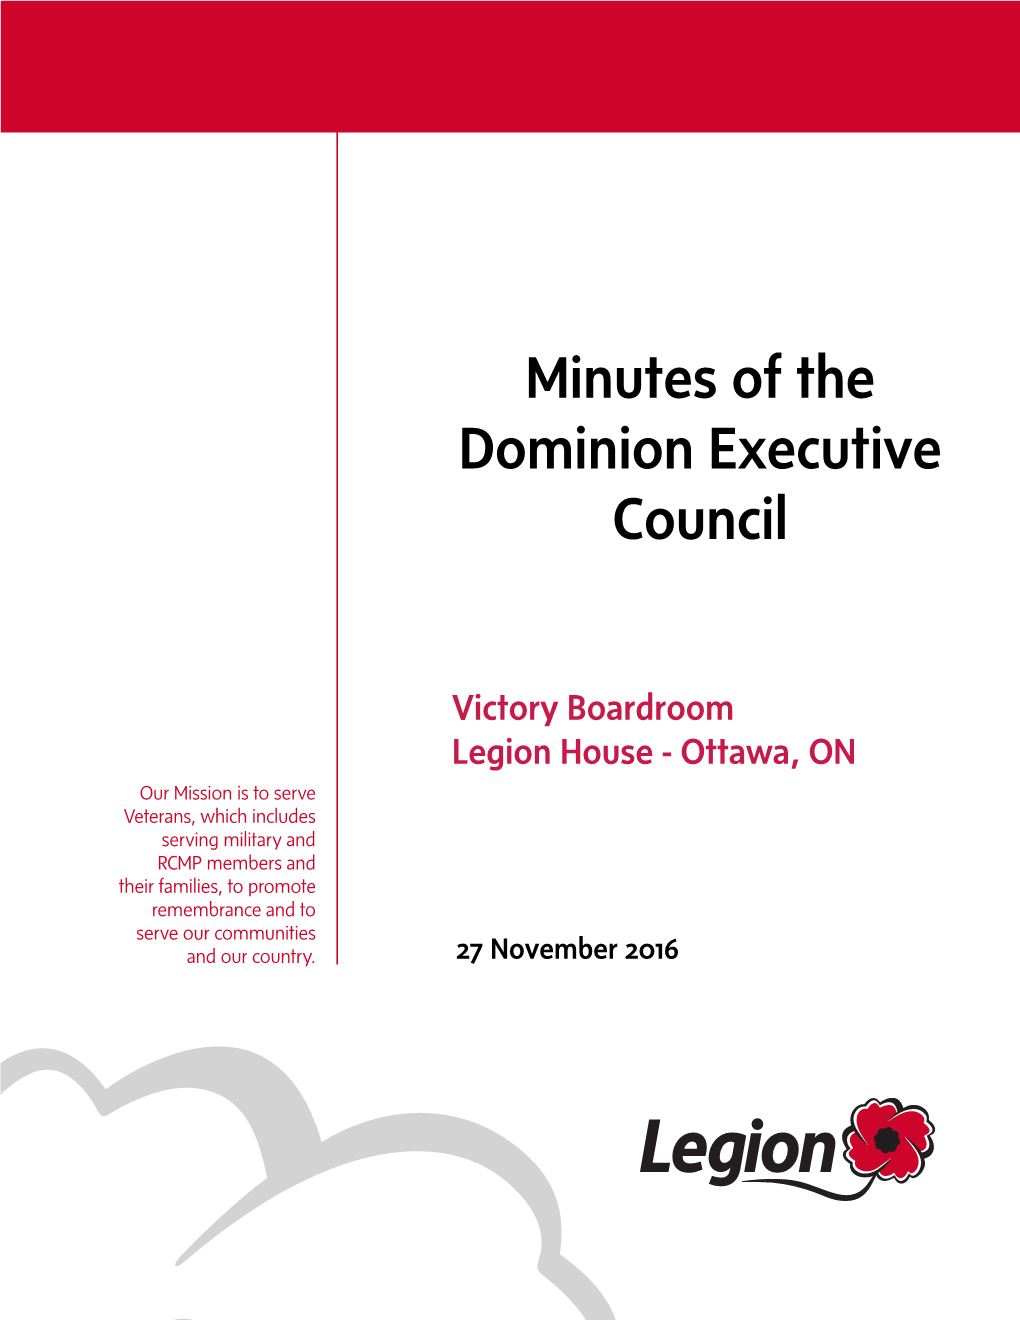 Minutes of the Dominion Executive Council